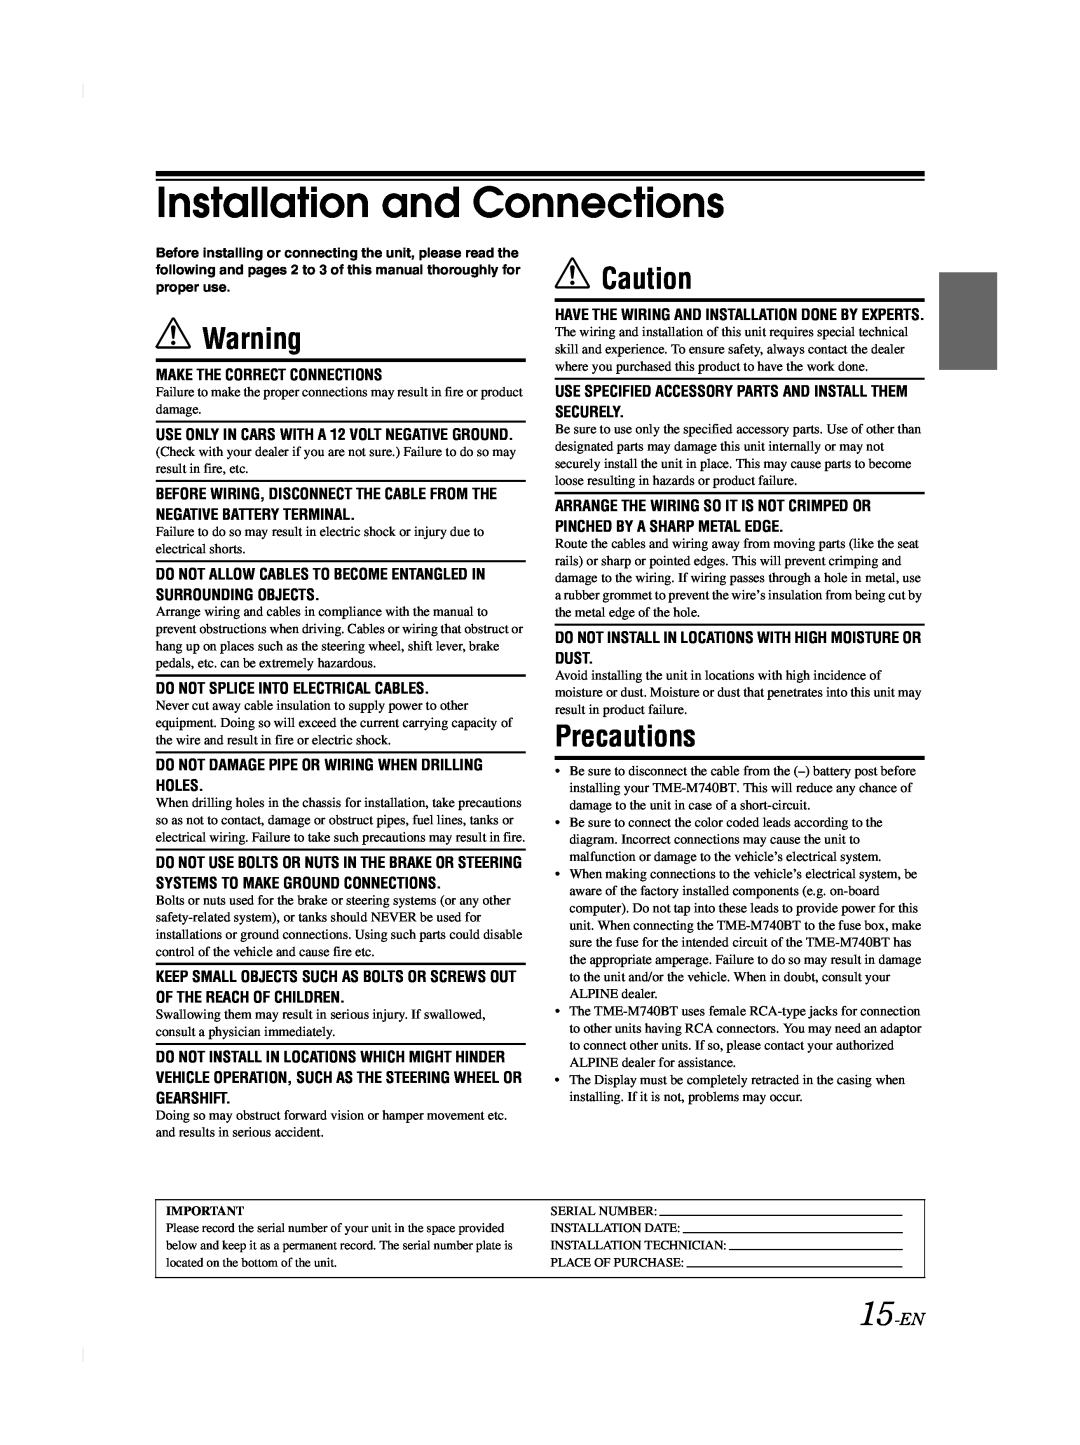 Alpine TME-M740BT owner manual Installation and Connections, Precautions, 15-EN 